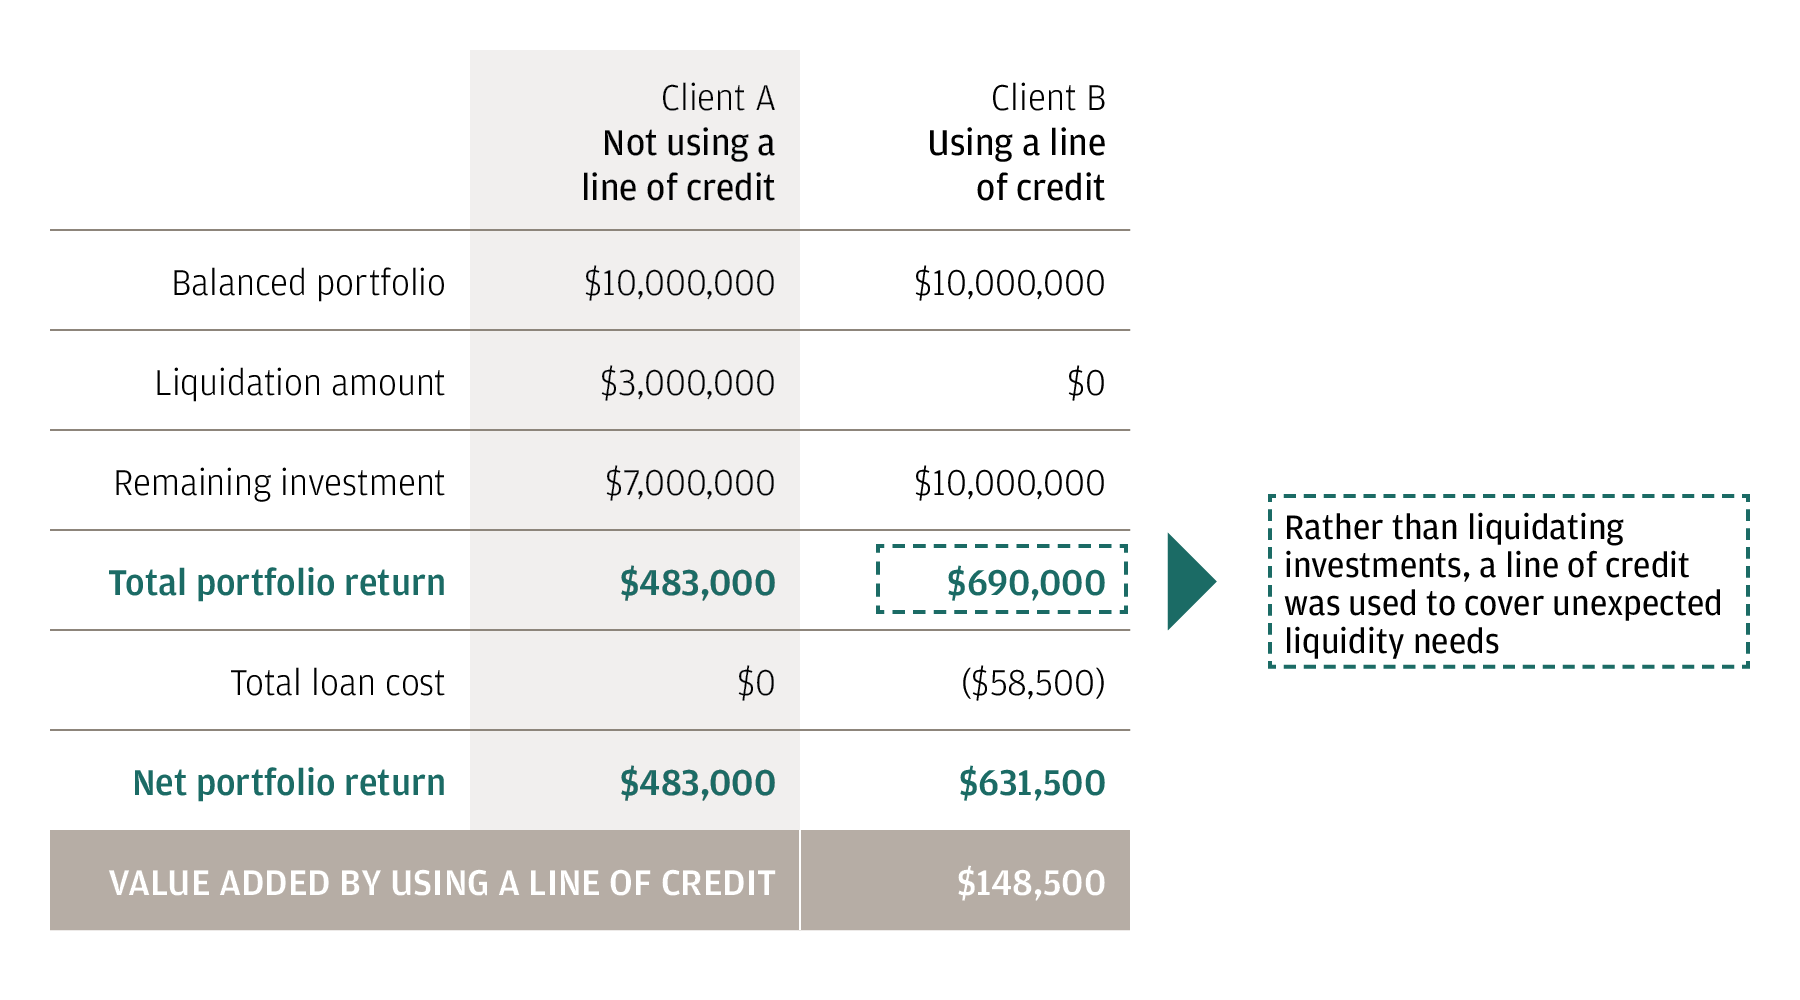 This table compares the results of meeting a liquidity need through the sale of portfolio securities versus meeting that same need by accessing a line of credit. 